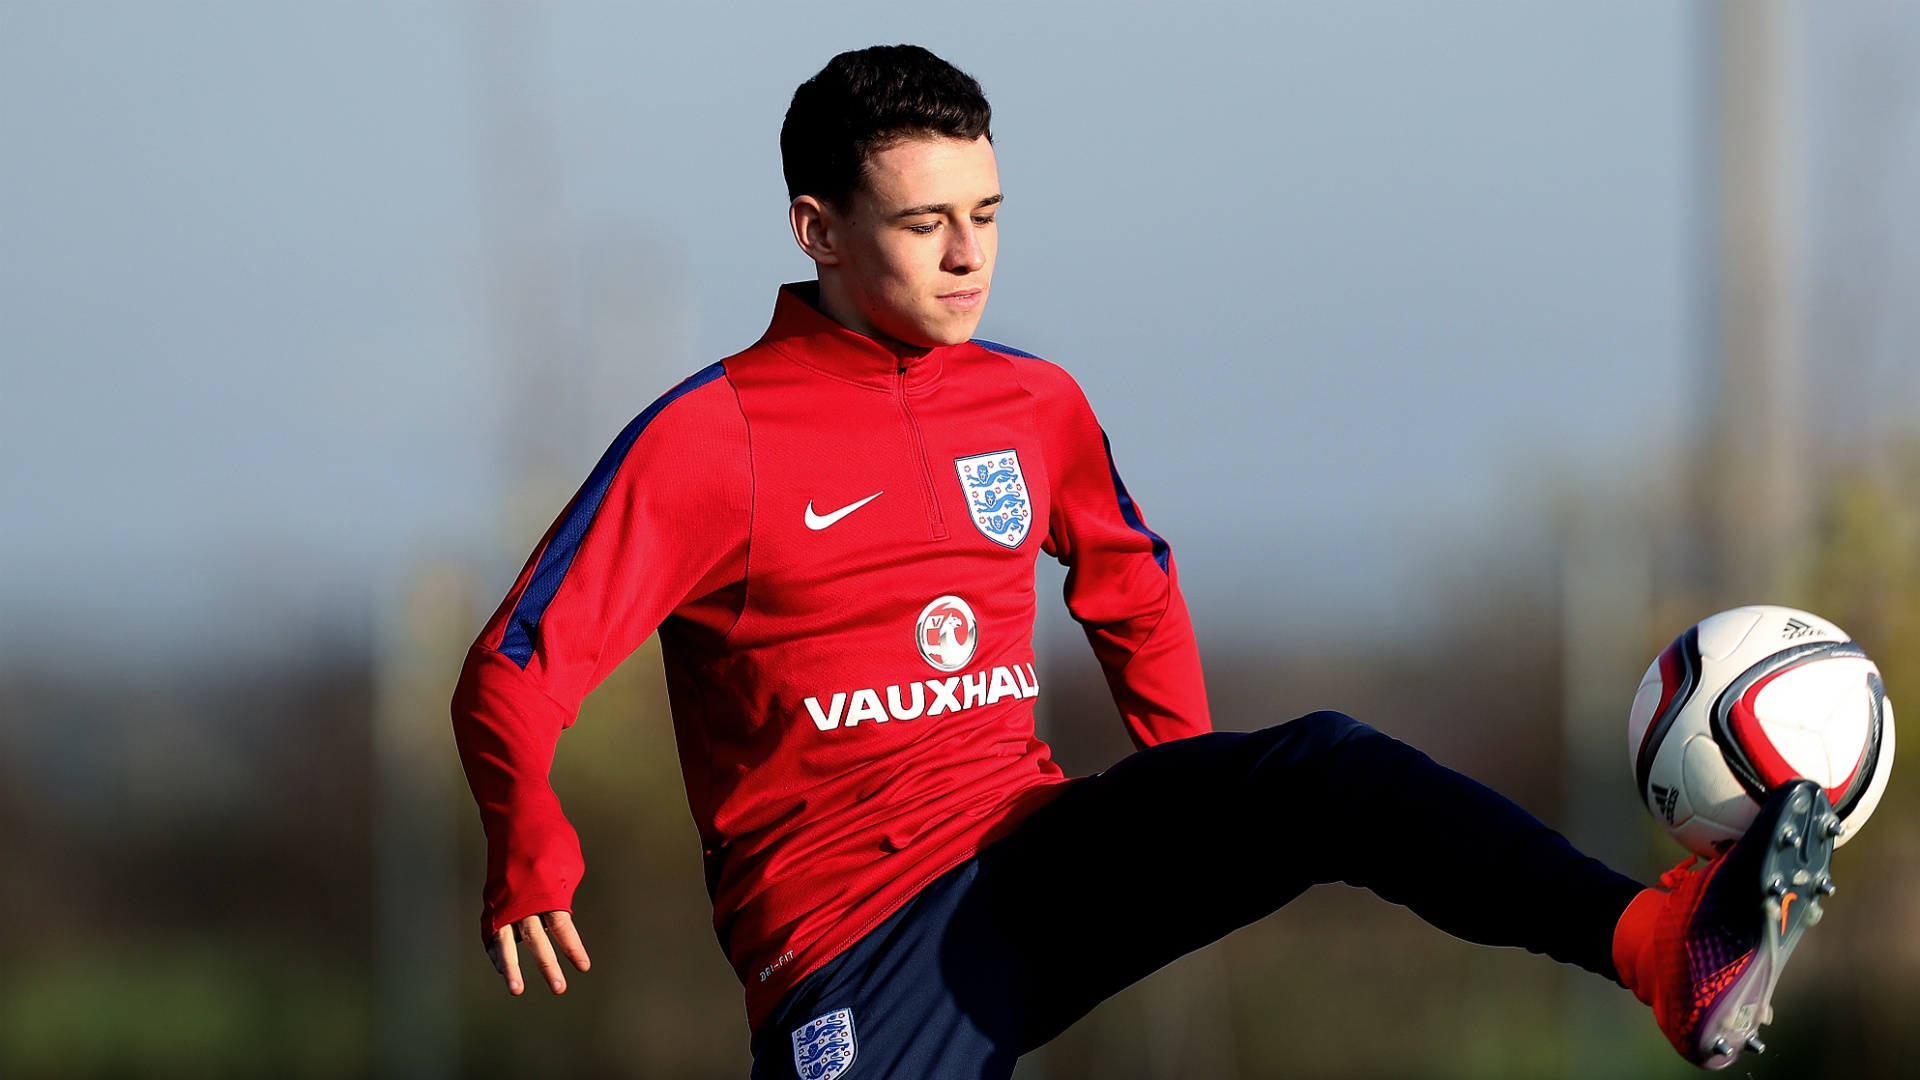 16-year-old Foden on City's bench, but who is he?